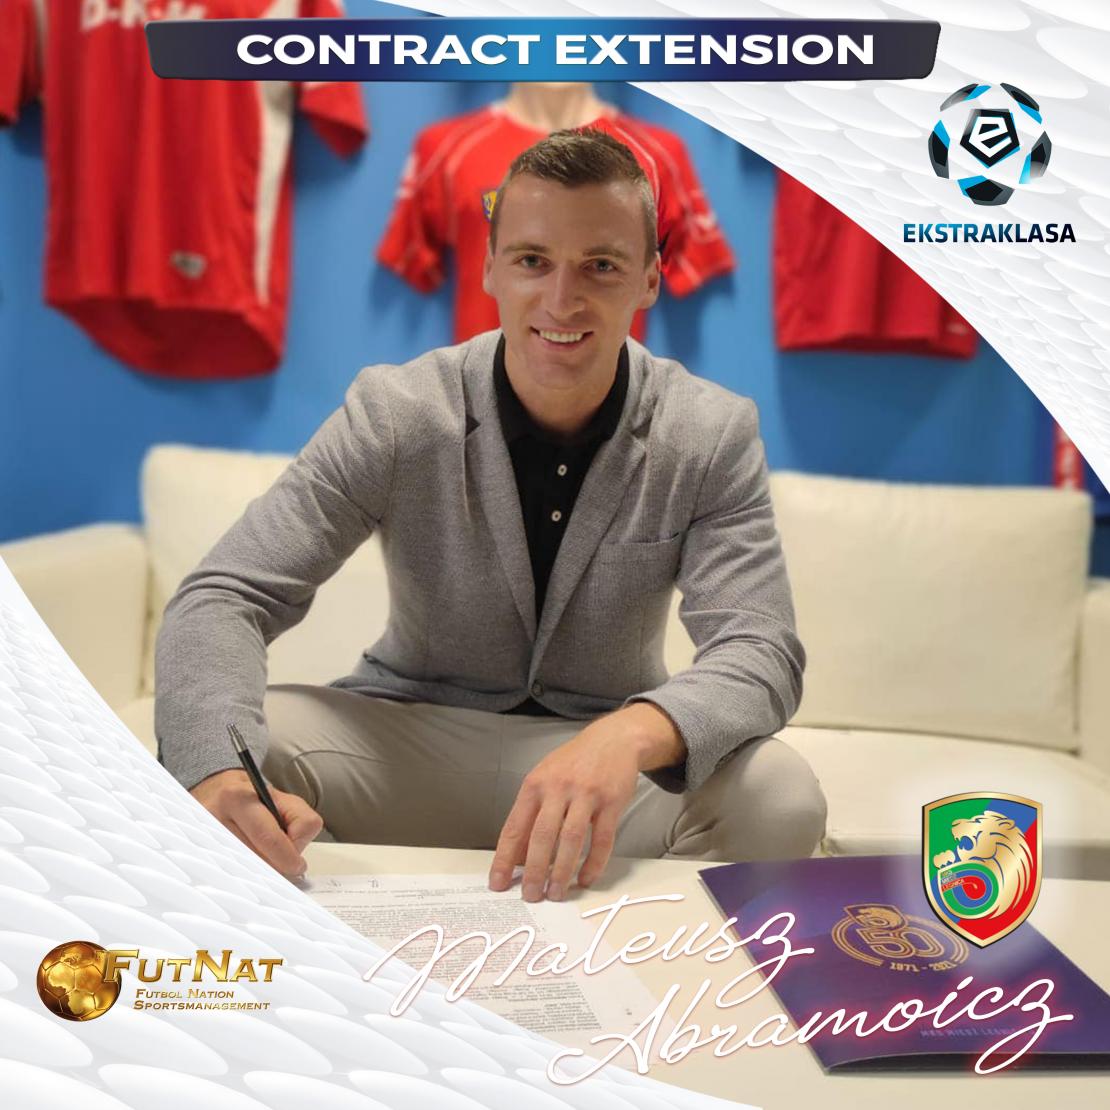 M.Abramowicz extended his contract at Miedz Legnica